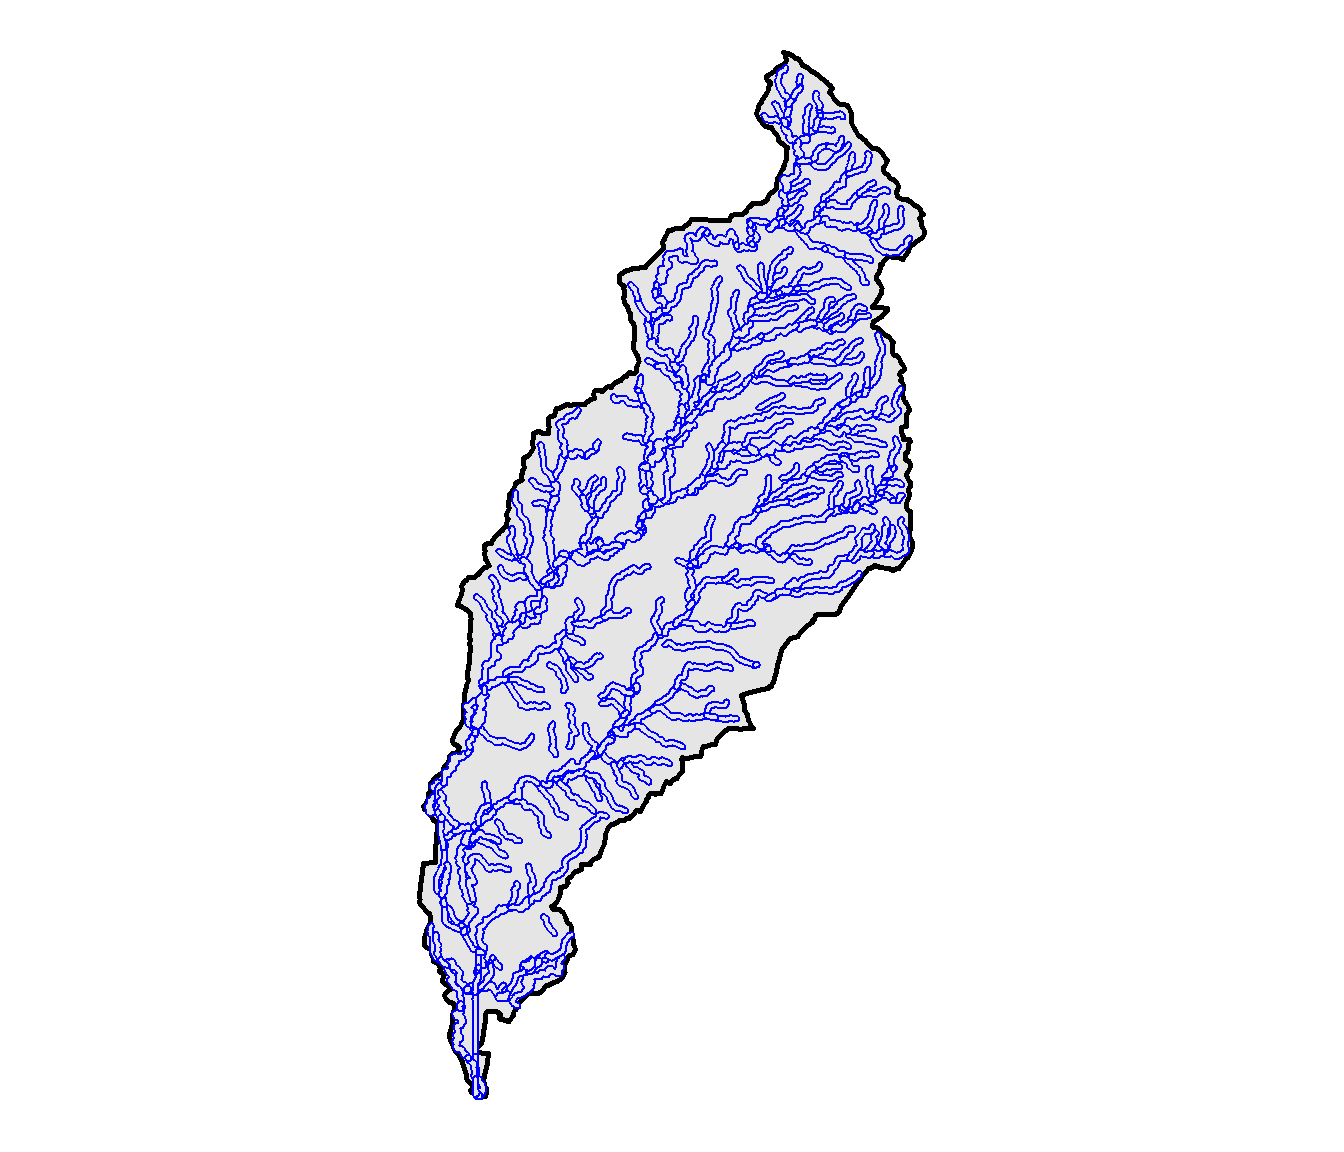 Buffers for each stream segment in the North Deer Creek watershed.